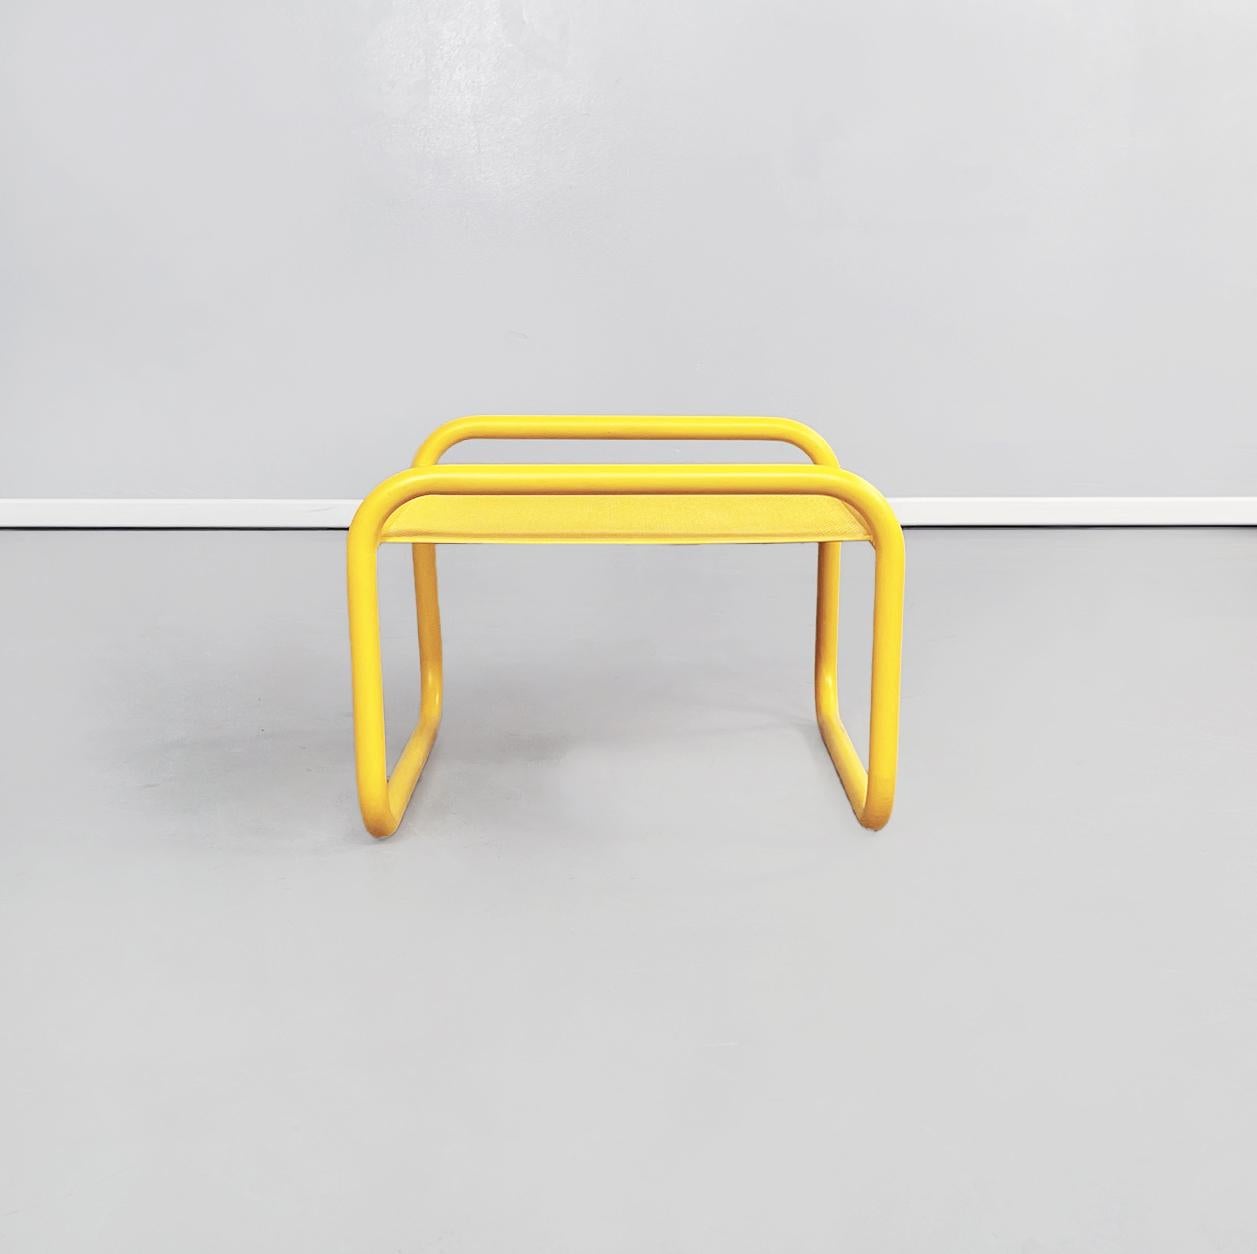 Italian mid-century yellow footstool Locus Solus by Gae Aulenti for Poltronova, 1960s
Footrest from the series Locus Solus in yellow painted metal. The rectangular top is perforated. The structure is in tubular. It is suitable for outdoor or garden